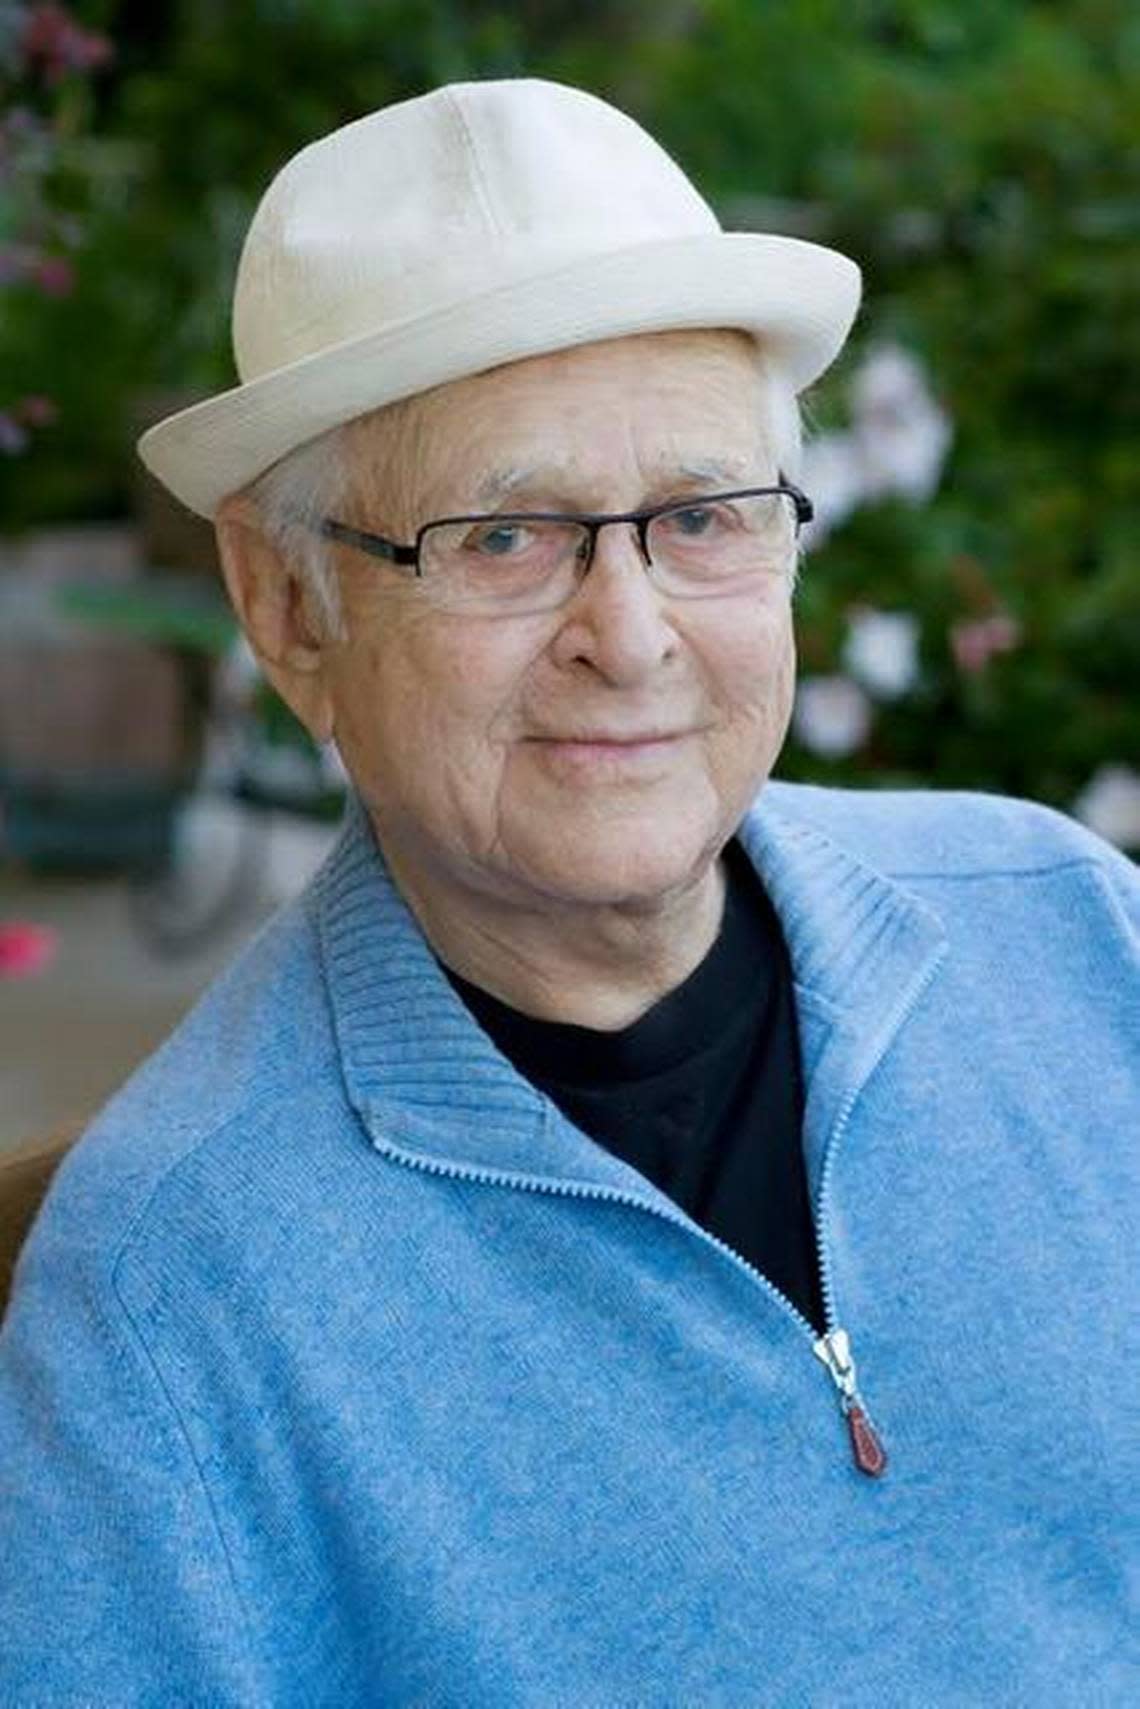 AT 92: Norman Lear, in a 2012 portrait in Los Angeles, reflected on his life in an autobiography and presentation at Miami Book Fair International in 2014.